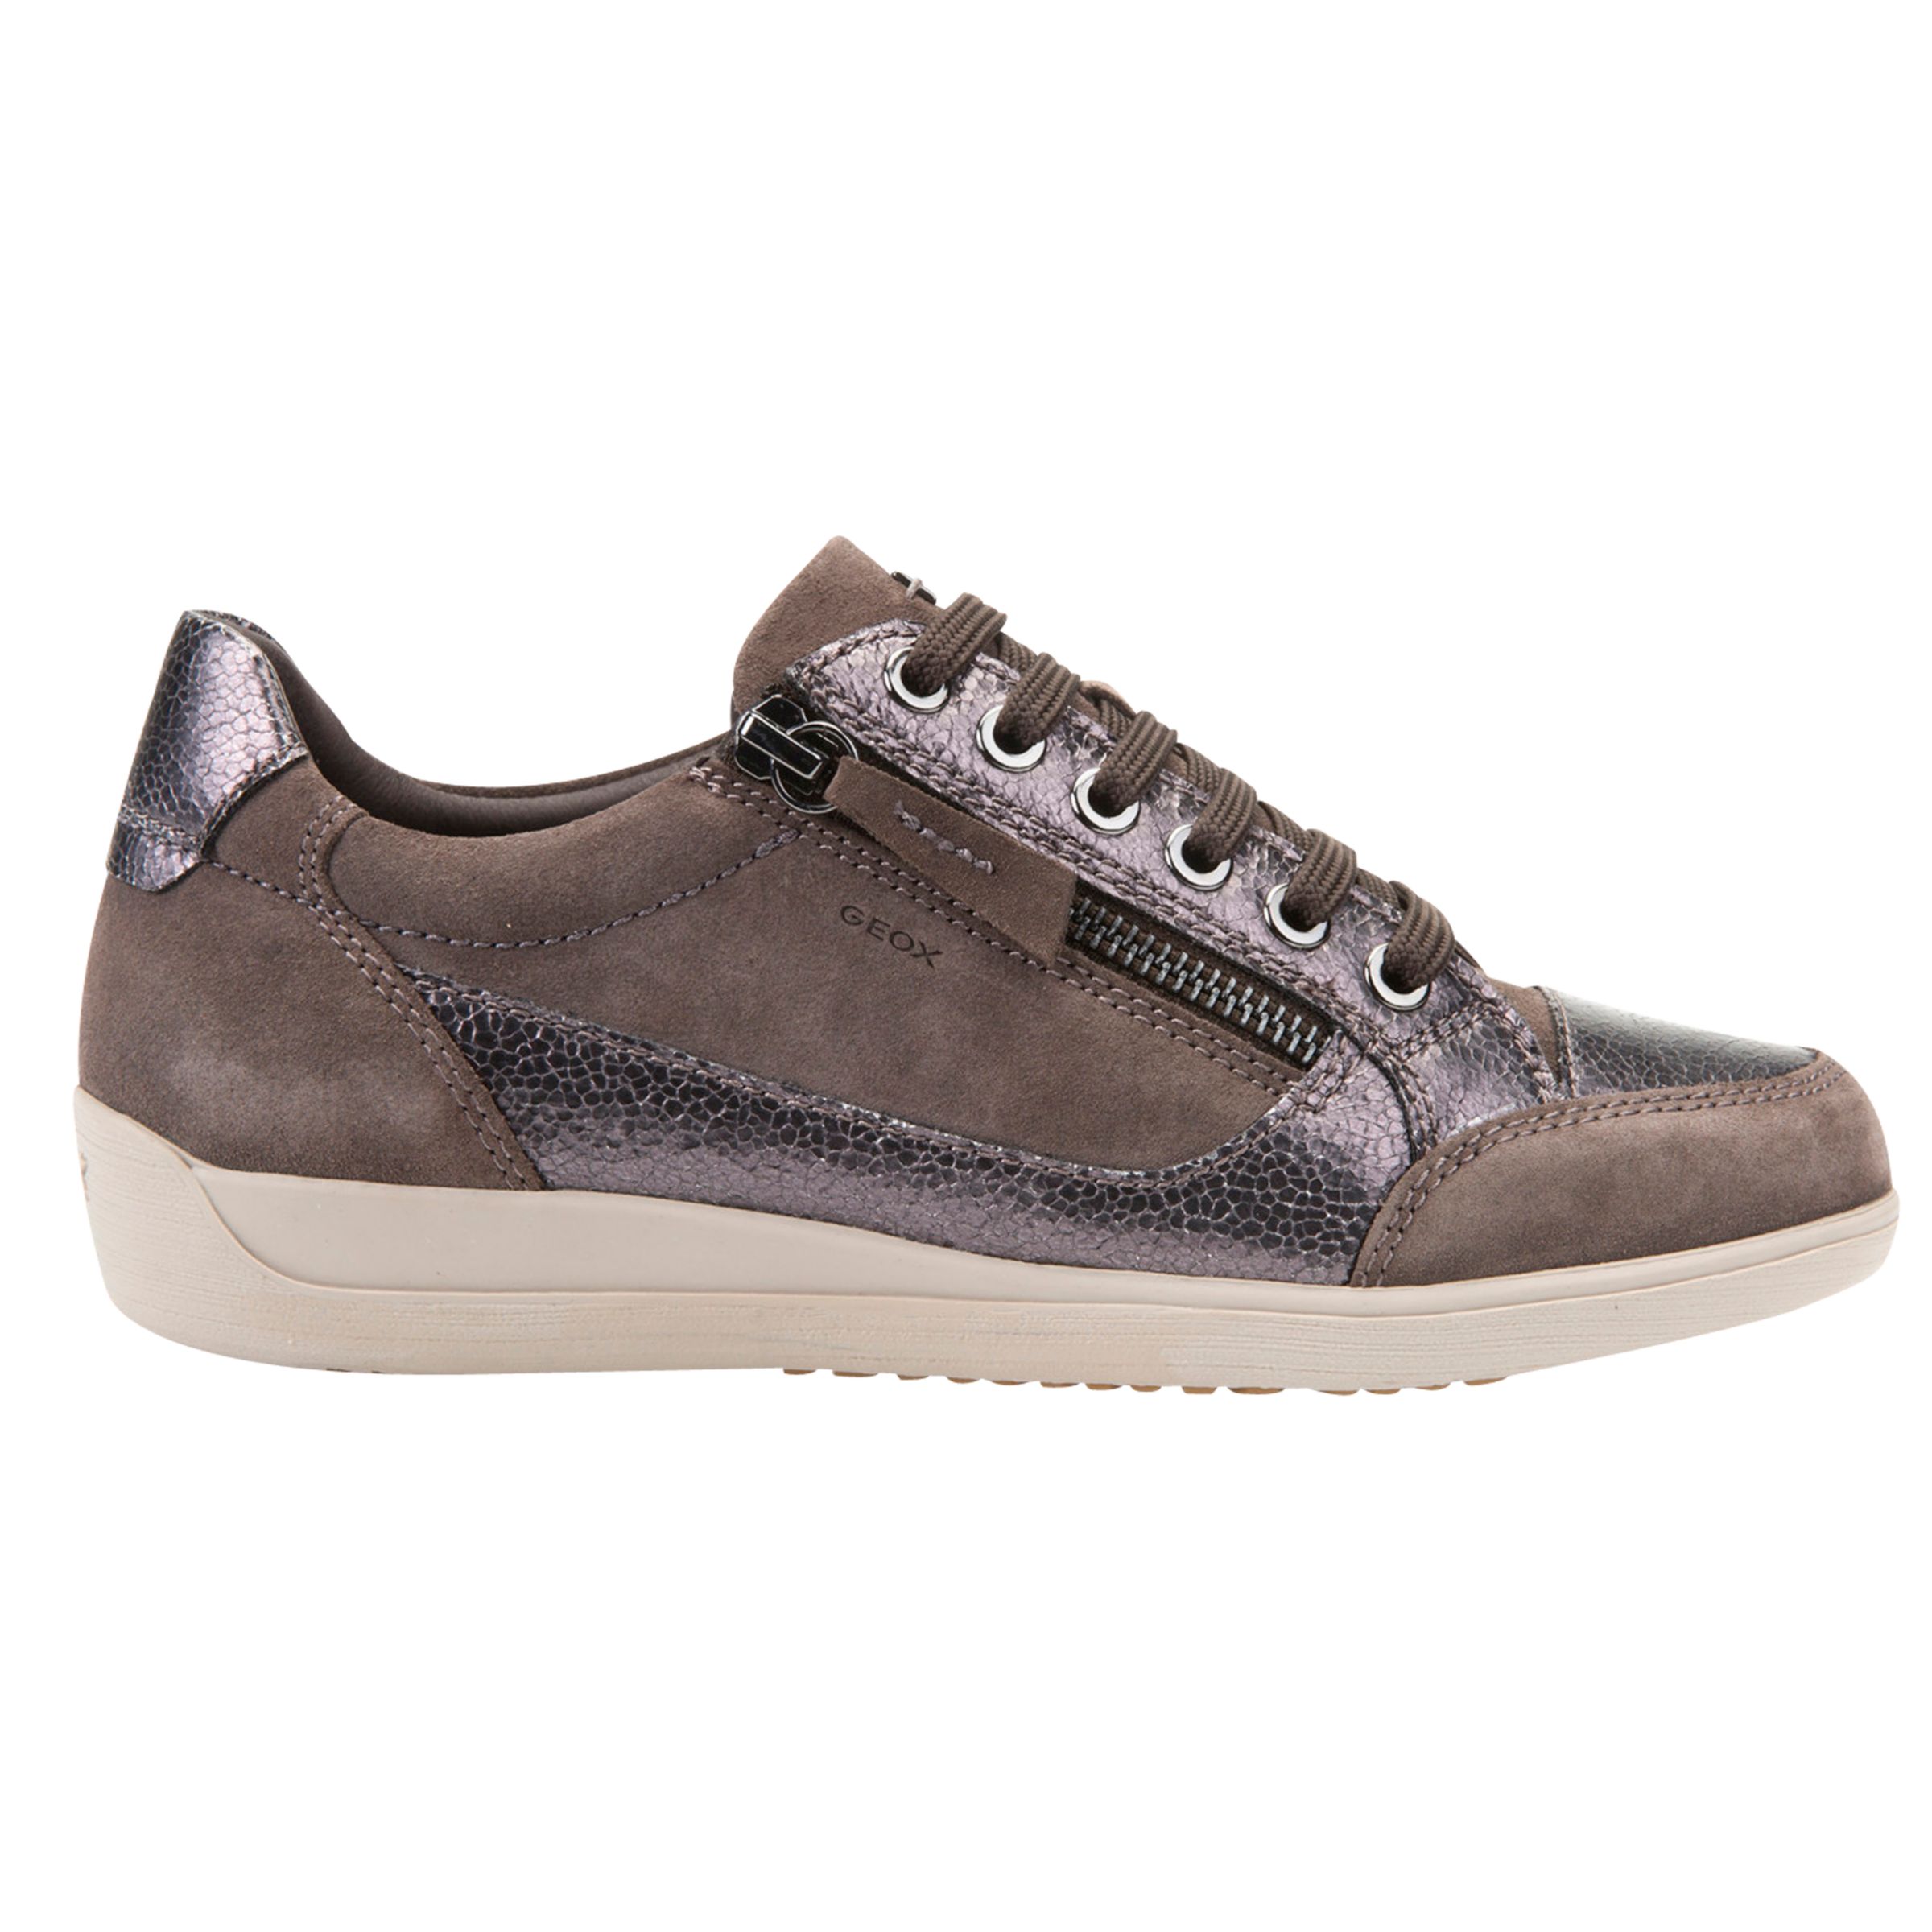 Geox Myria Lace Up Trainers, Chestnut